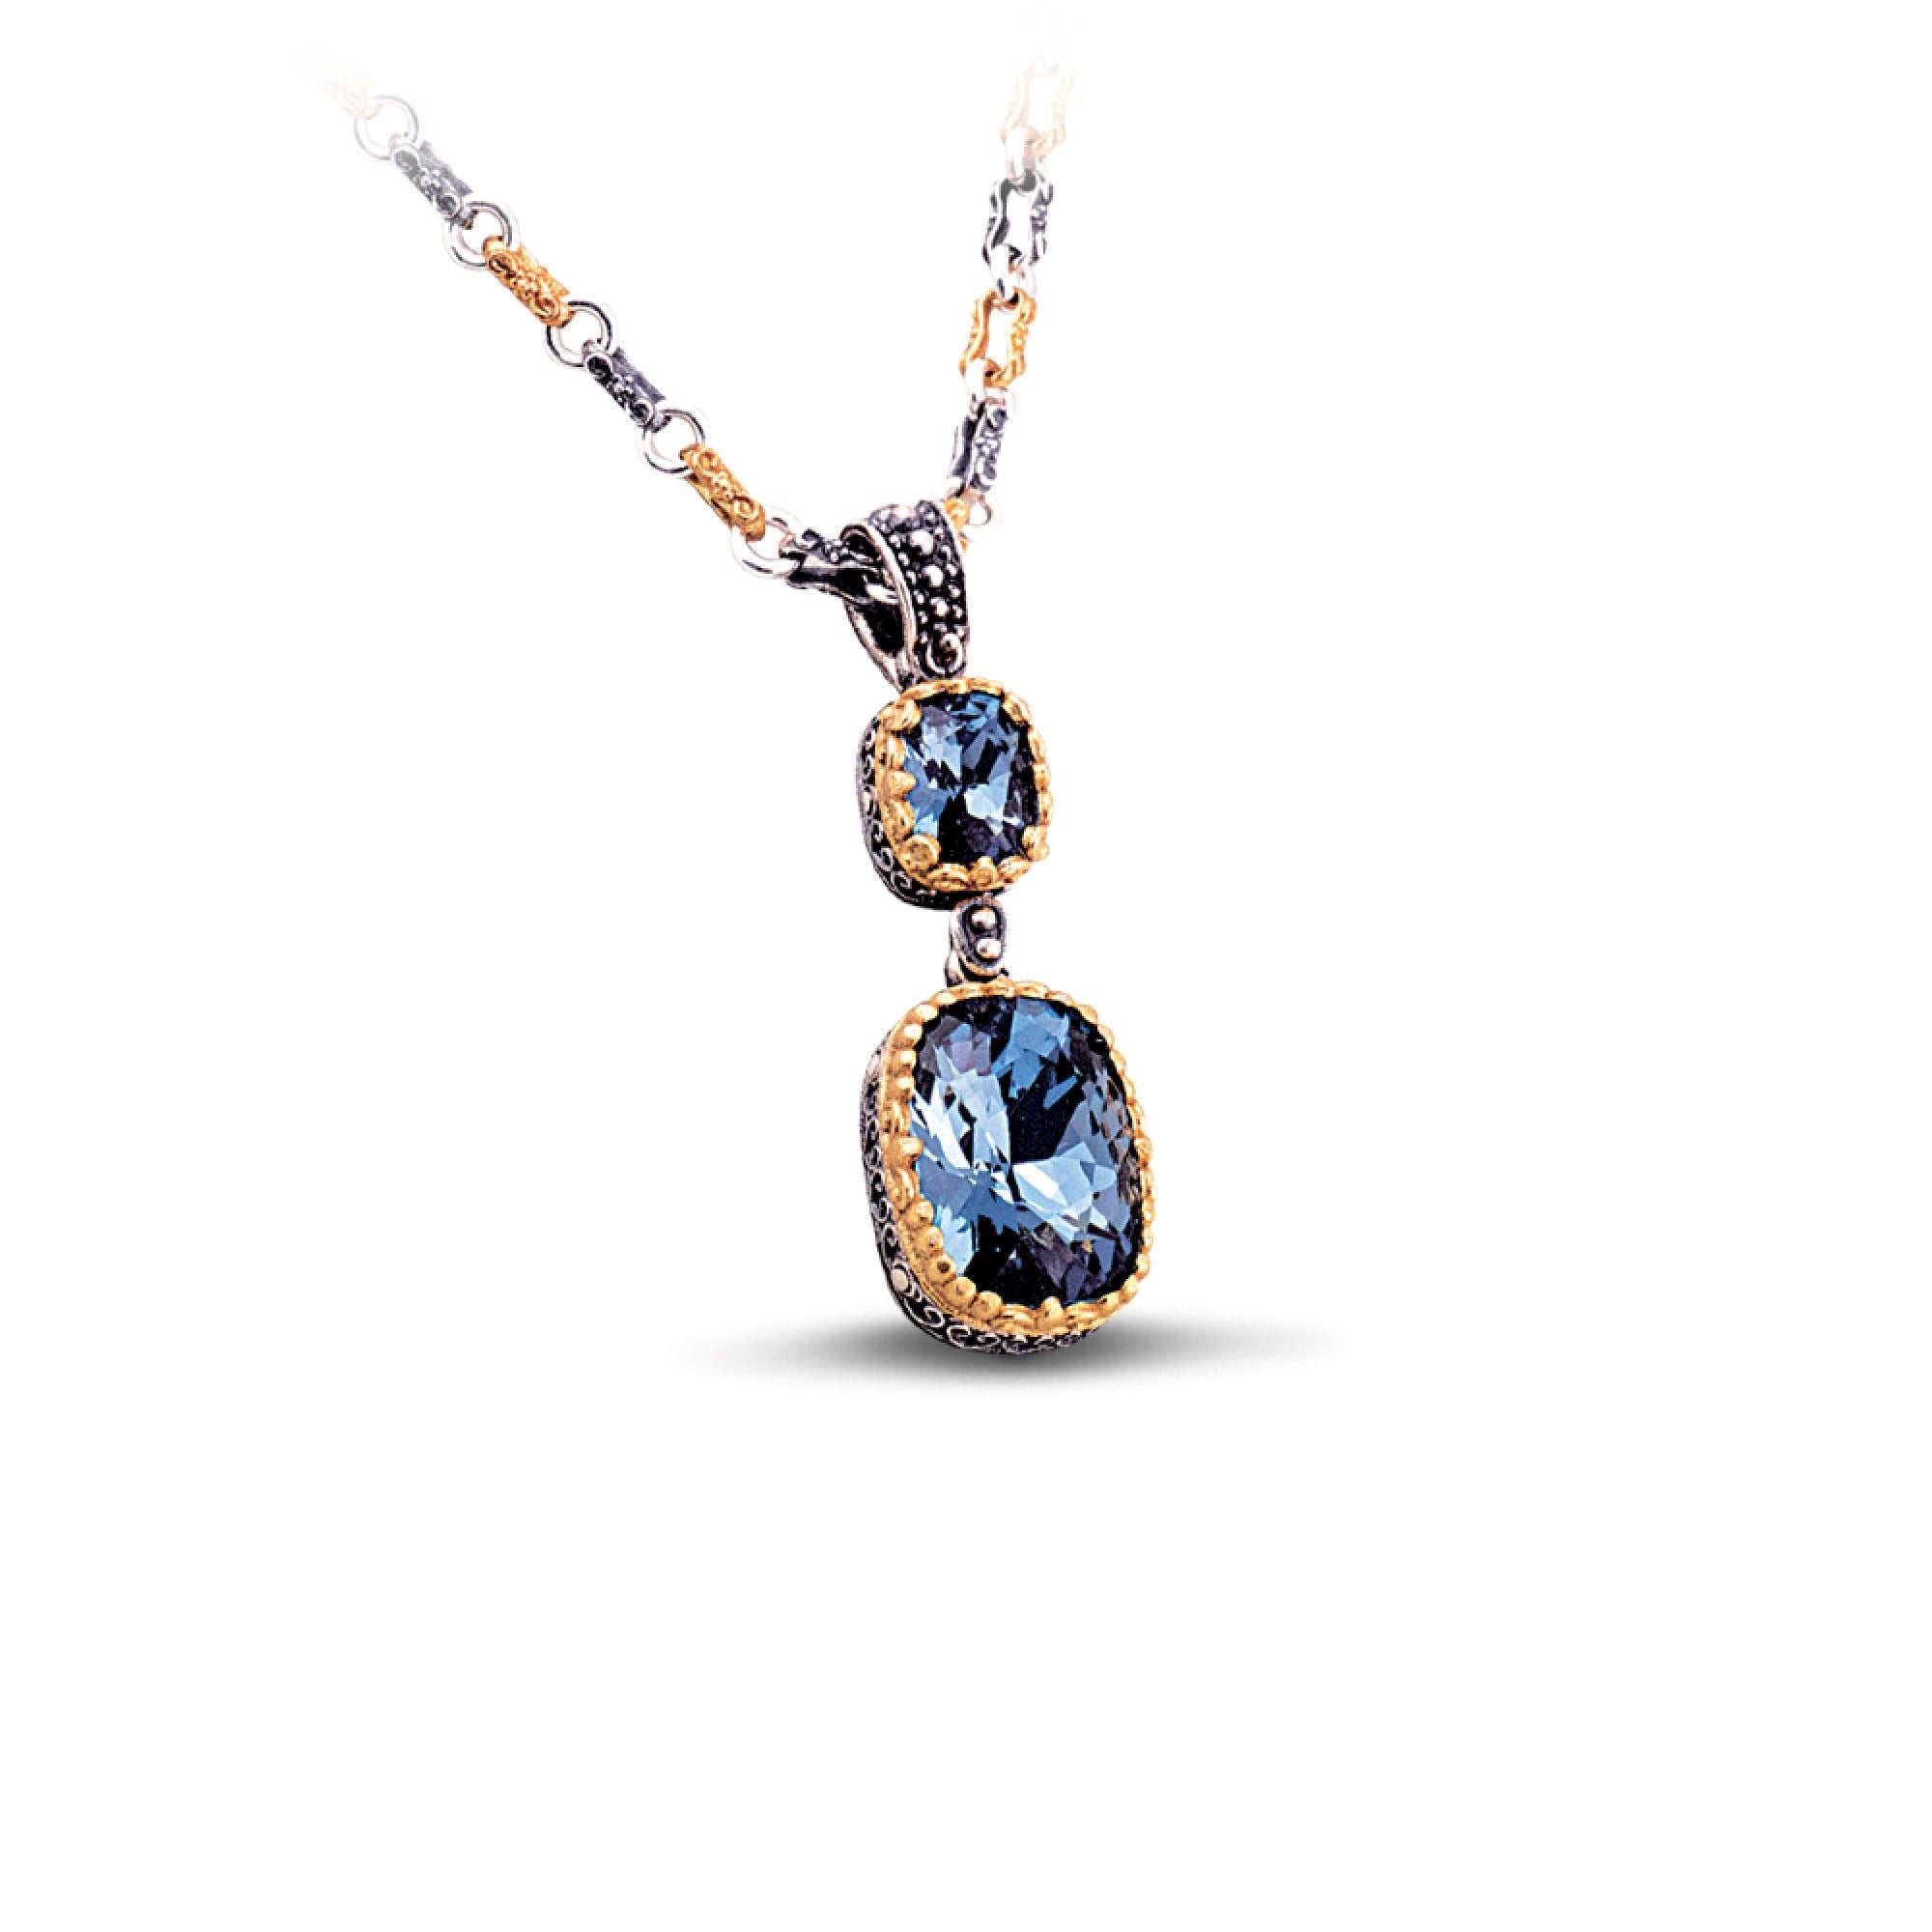 From the Passatempo collection, a beautiful pendant with blue Swarovski crystals in ornate gold-plated bezels.

The pendant comes with the handmade tricolor chain, signature of Dimitrios Exclusive.

